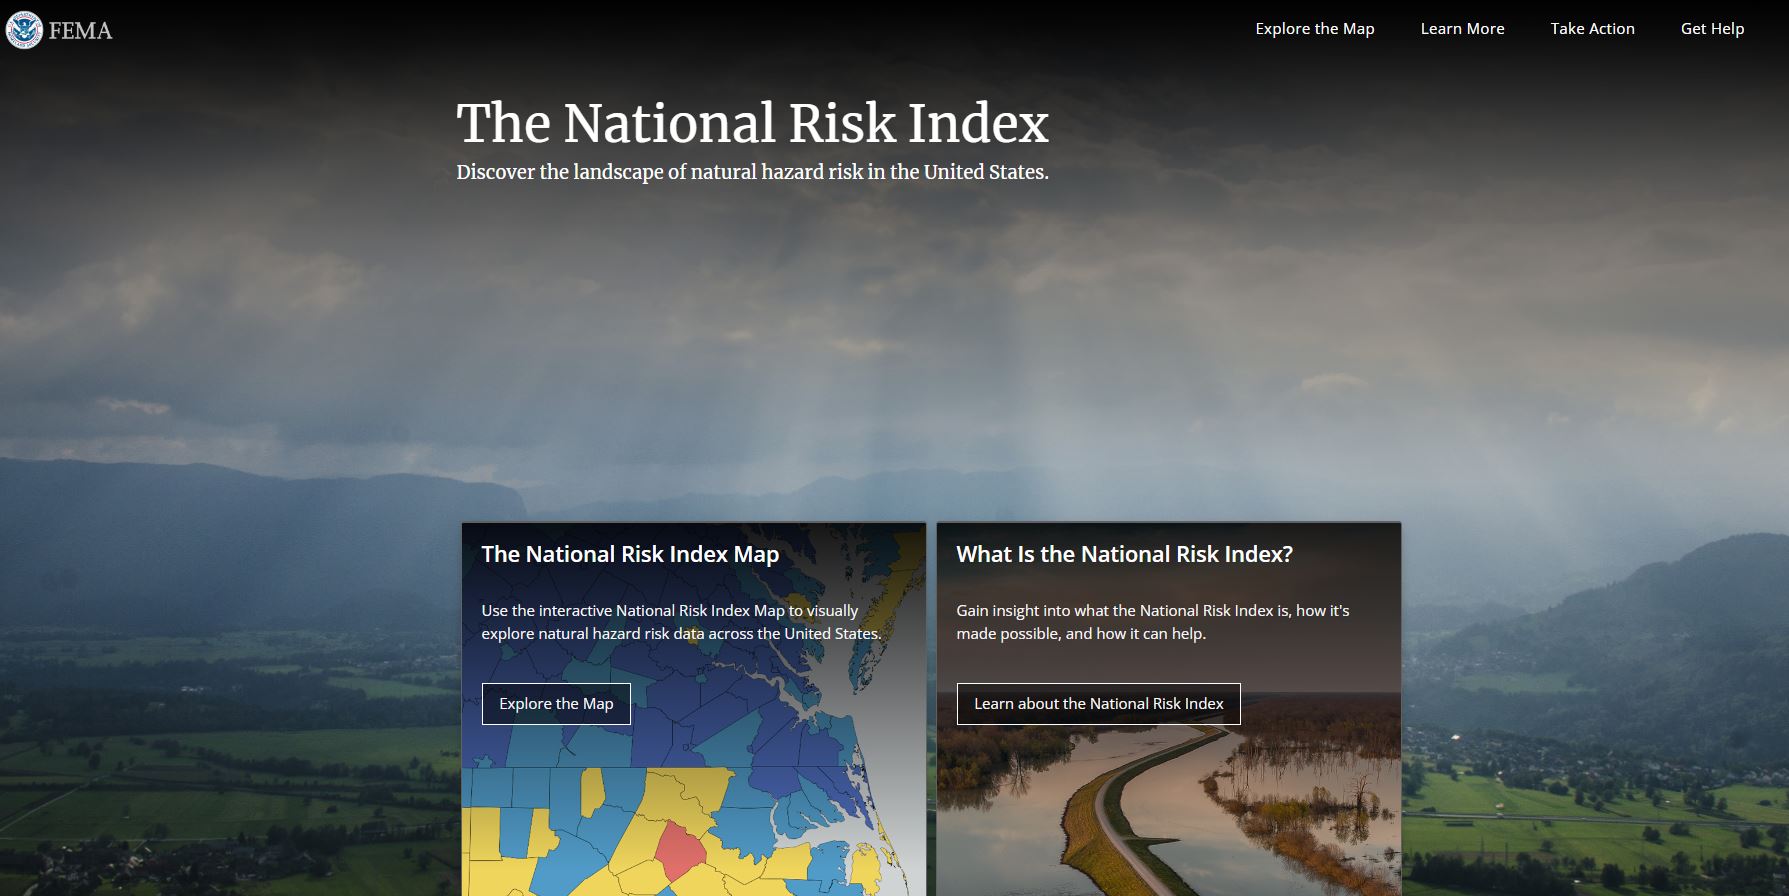 This is an image of the National Risk Index homepage. Picture is a cloudy sky over mountains and greenspace. Text reads: The National Risk Index. Discover the landscape of natural hazard risk in the United States. The National Risk Index Map: Use the interactive National Risk Index map to visually explore natural hazard risk data across the United States. What is the National Risk Index: Gain insight into what the National Risk Index is, how it's made possible, and how it can help. 